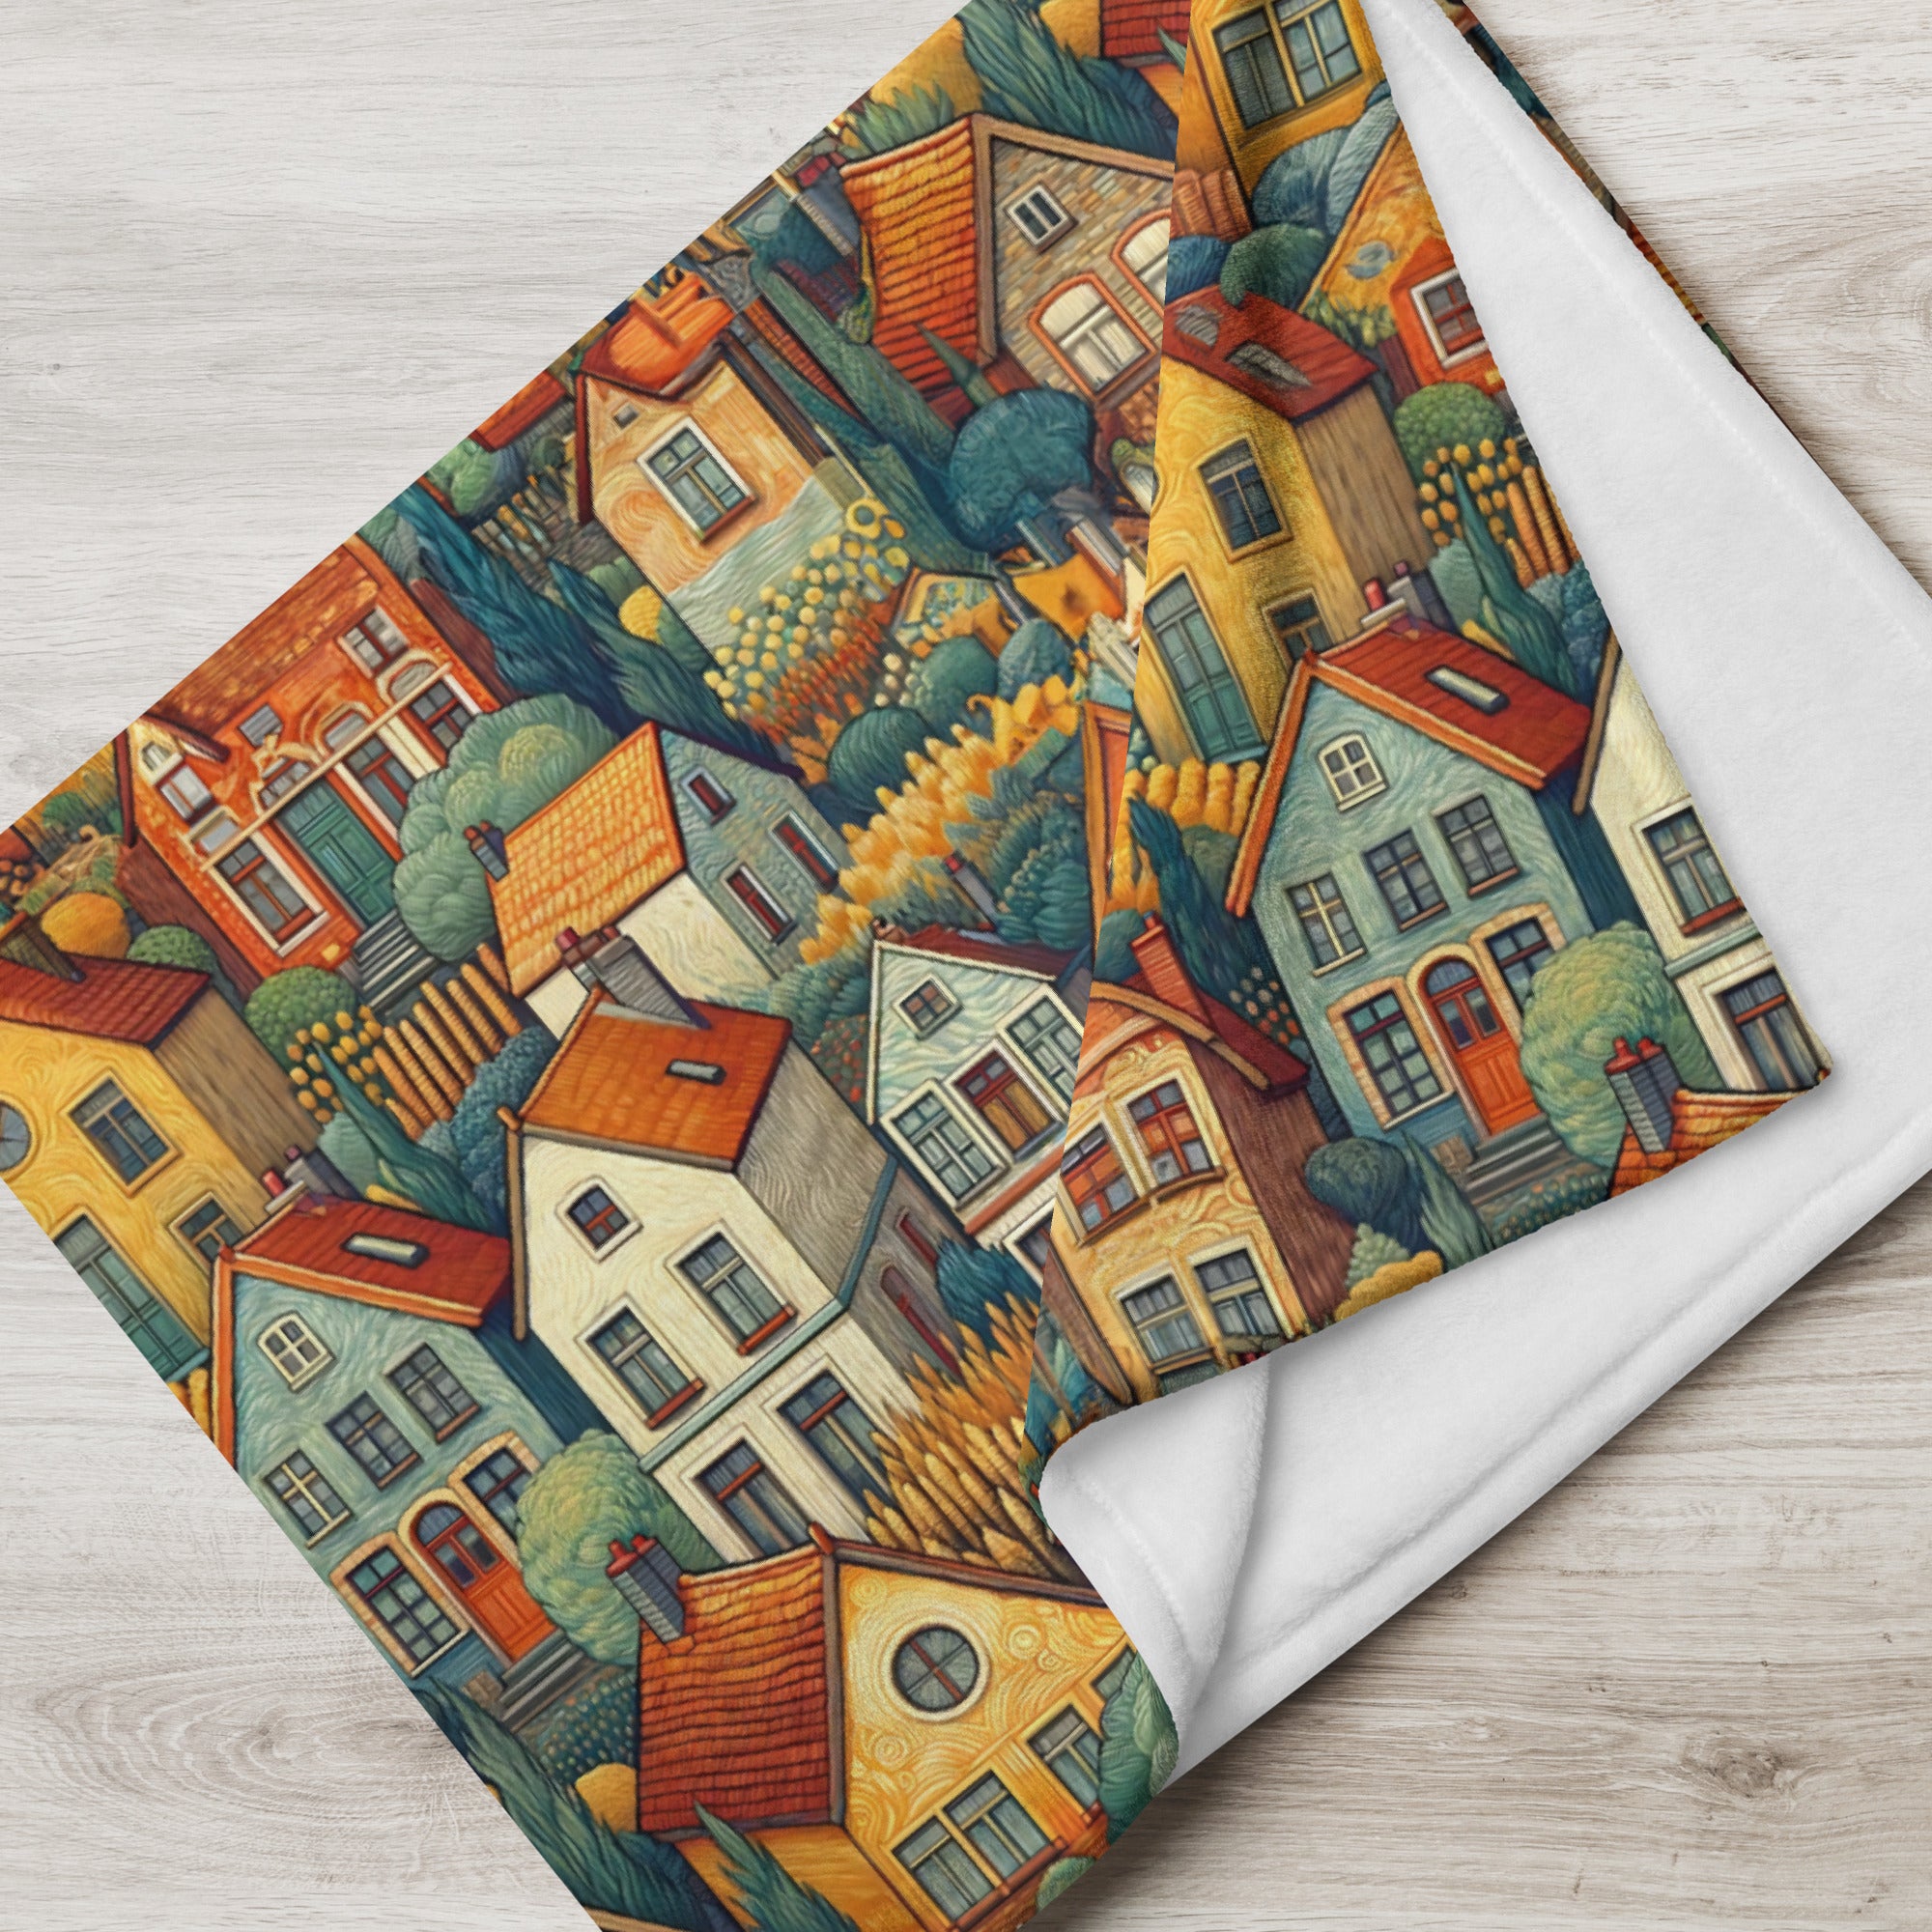 Vincent van Gogh 'Houses at Auvers' Famous Painting Throw Blanket | Premium Art Throw